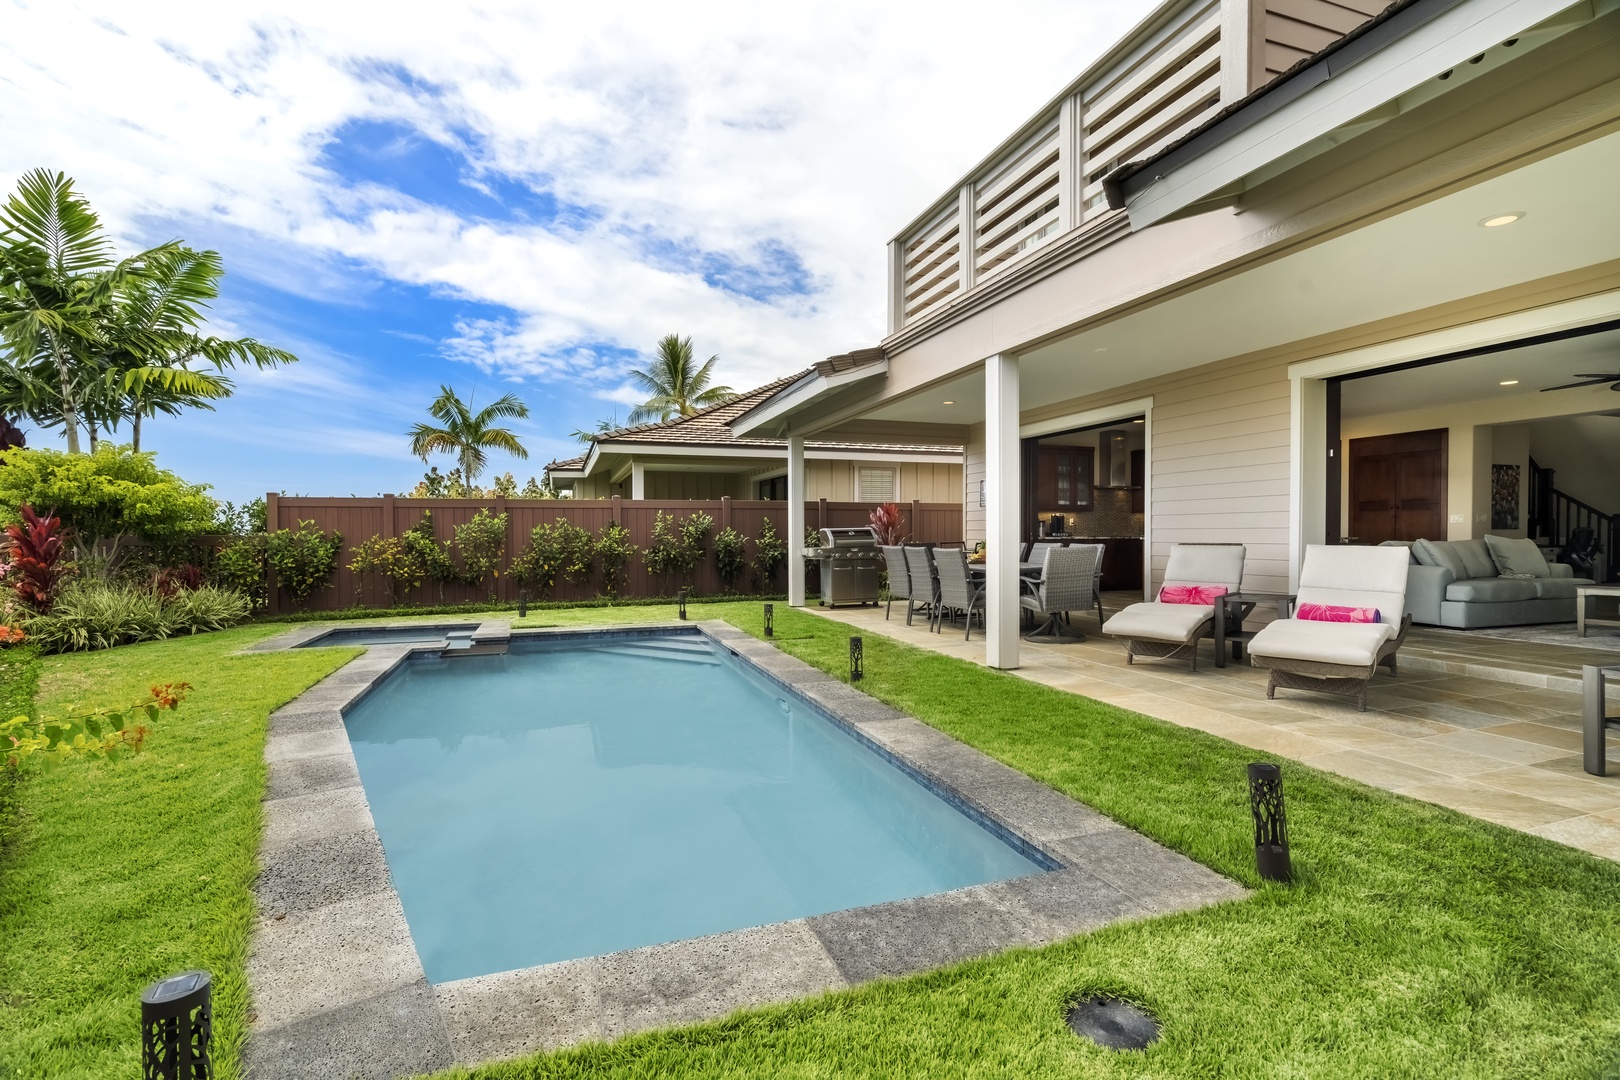 Kailua Kona Vacation Rentals, Green/Blue Combo - Saltwater pool perfect for laps or leisure